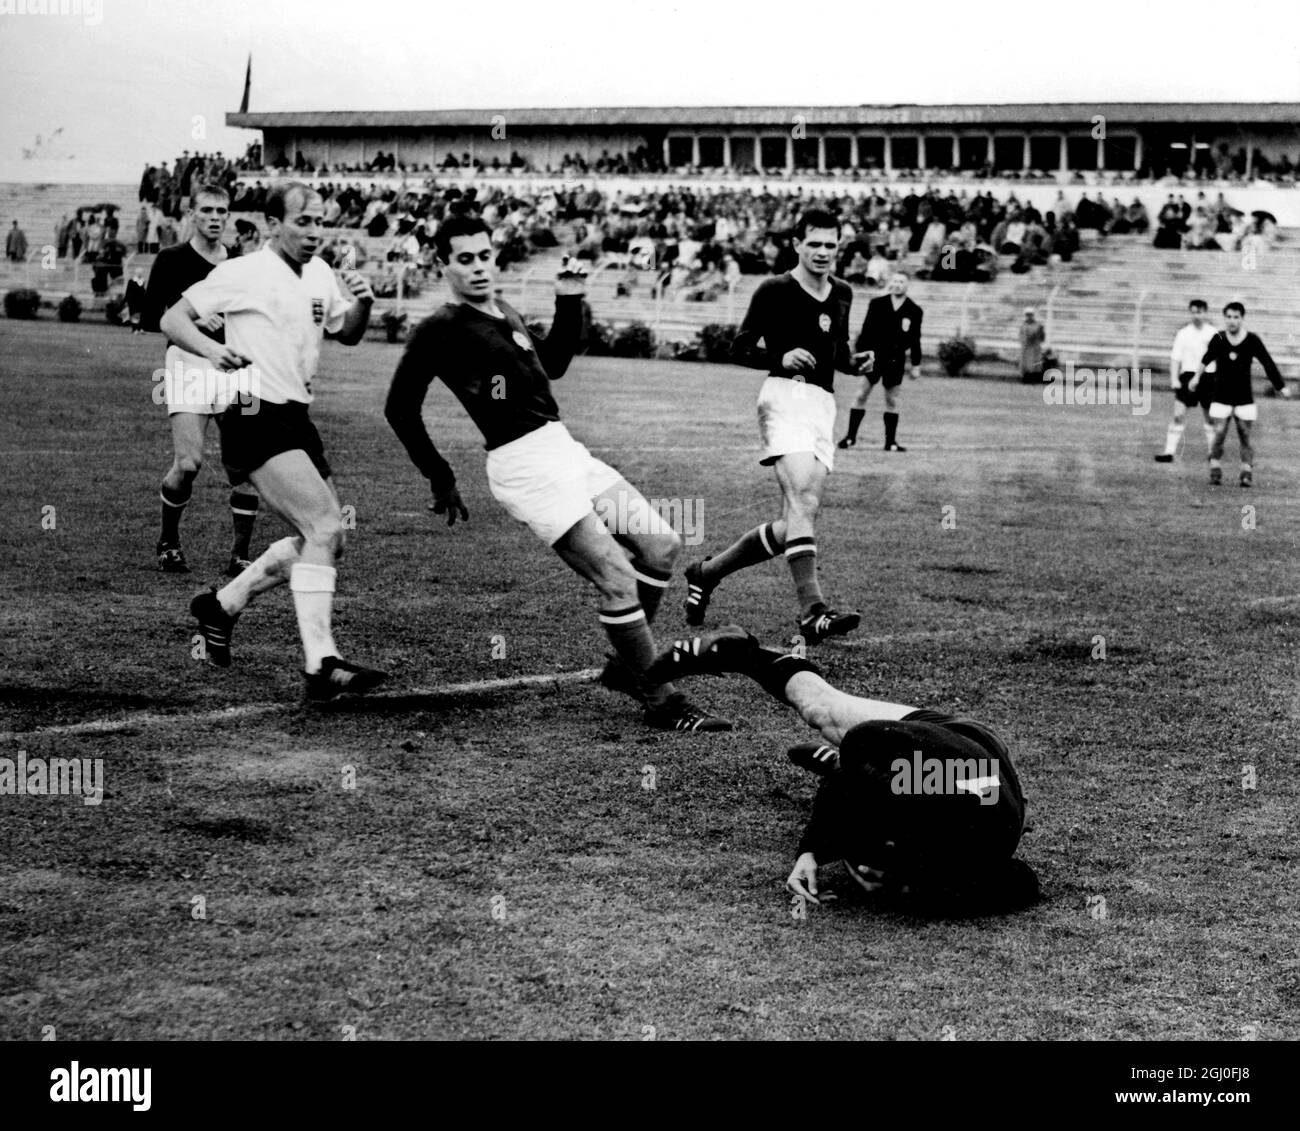 1962 World Cup England v Hungary Grosics, the Hungarian goalkeeper dives to save from England's Bobby Charlton during the World Cup match in Rancagua, Chile. 4th June 1962. Stock Photo